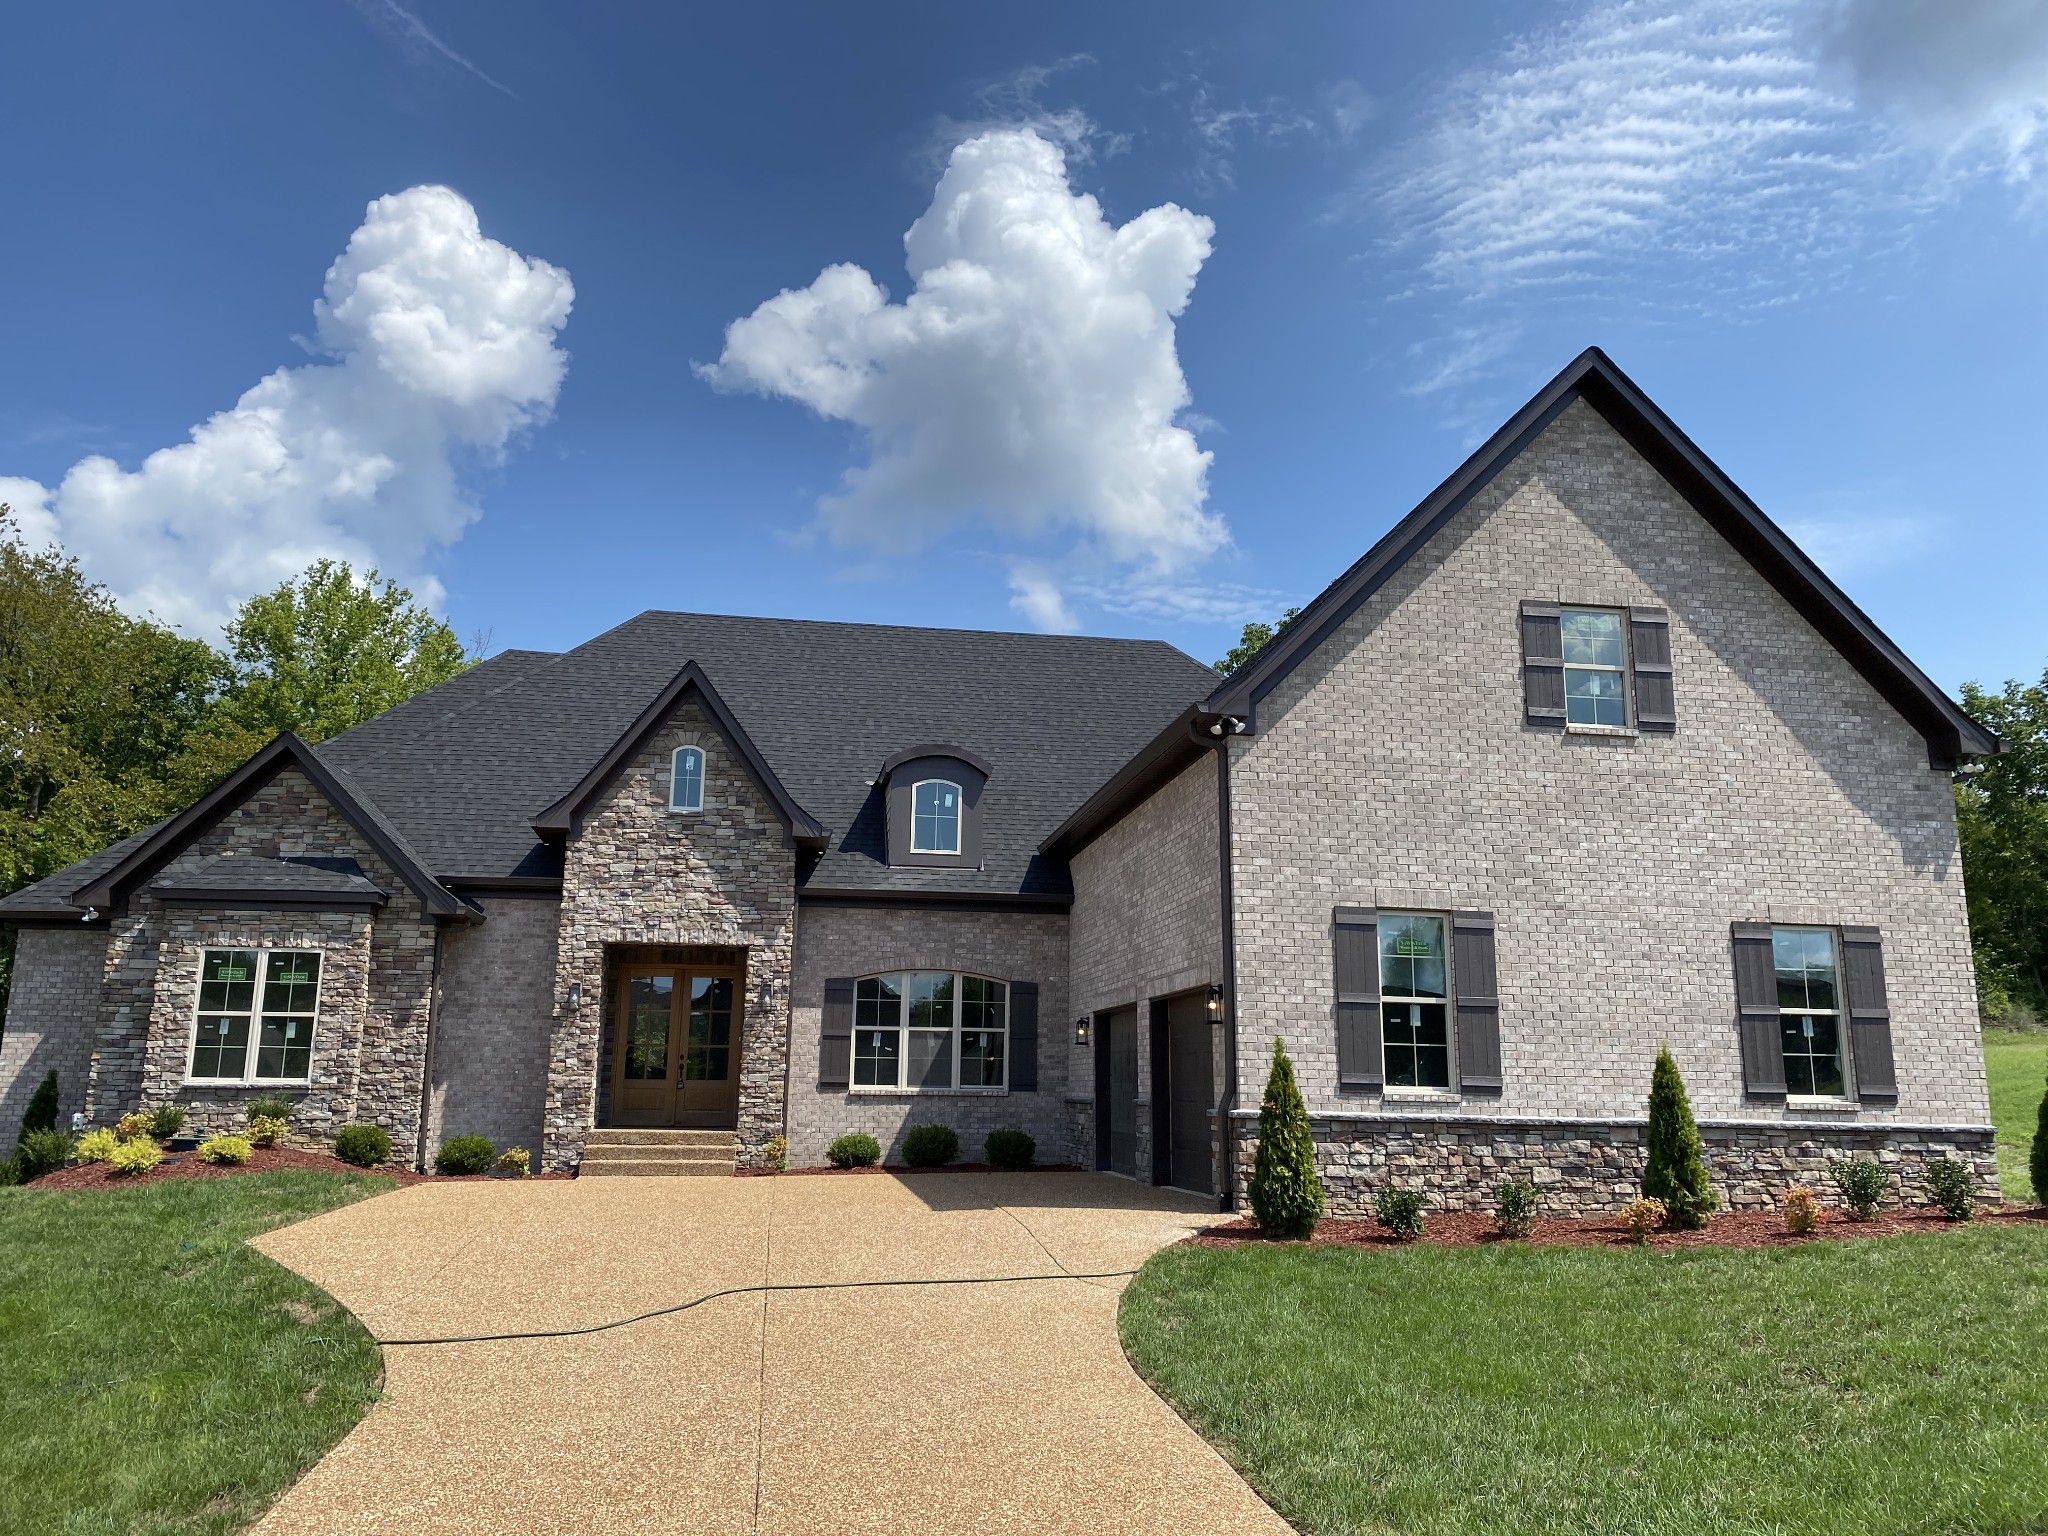 Quality Homes For Sale In Hendersonville Tn